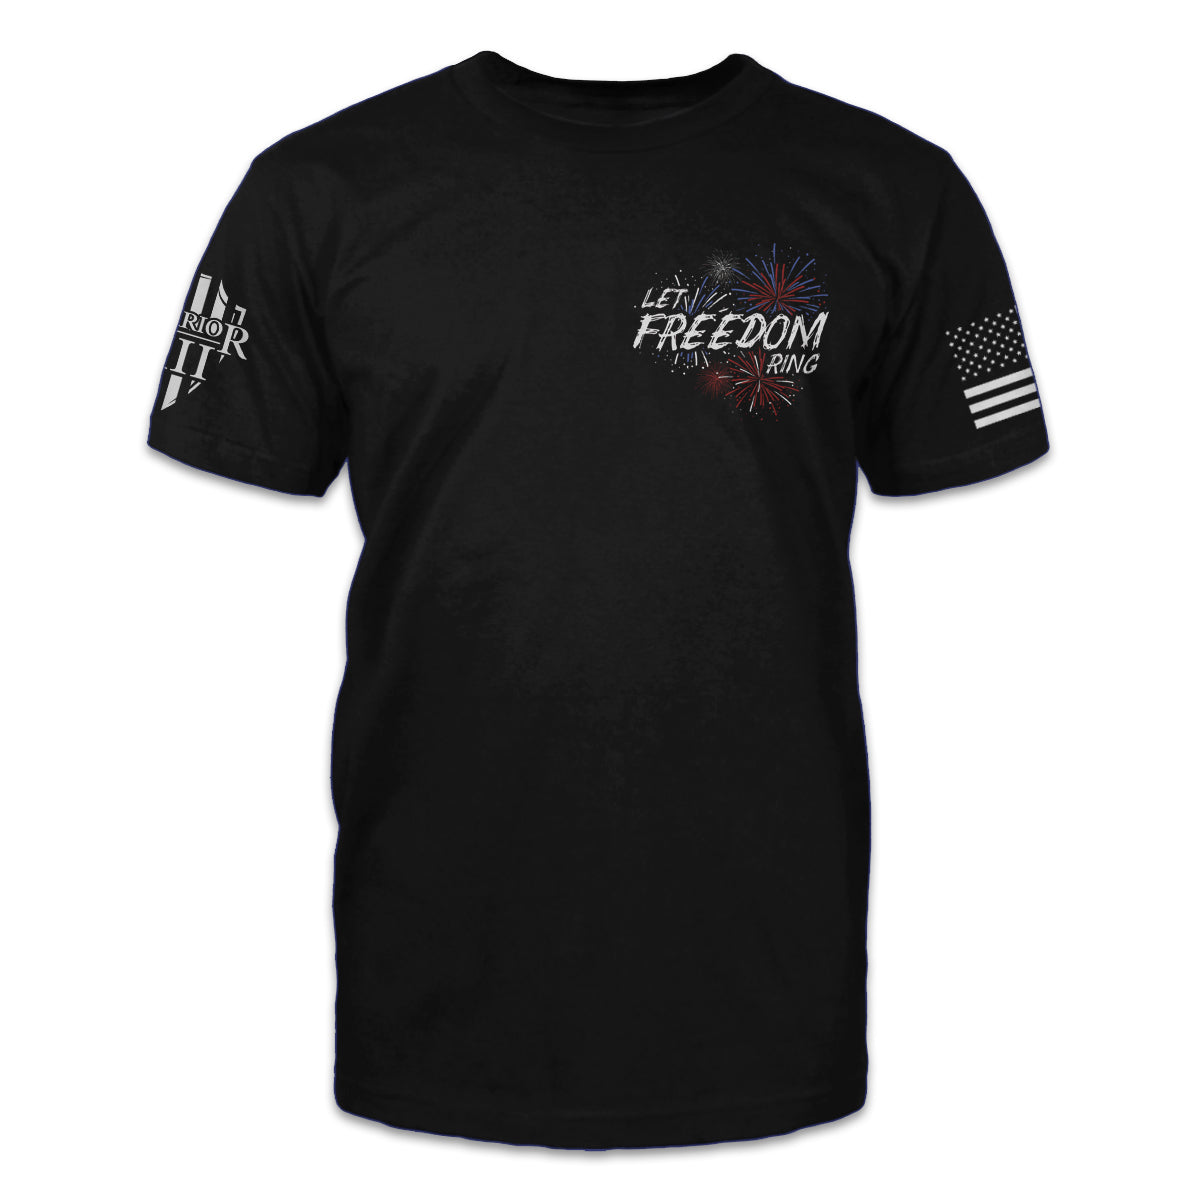 A black t-shirt with the words "Let Freedom Ring" printed on the front. 